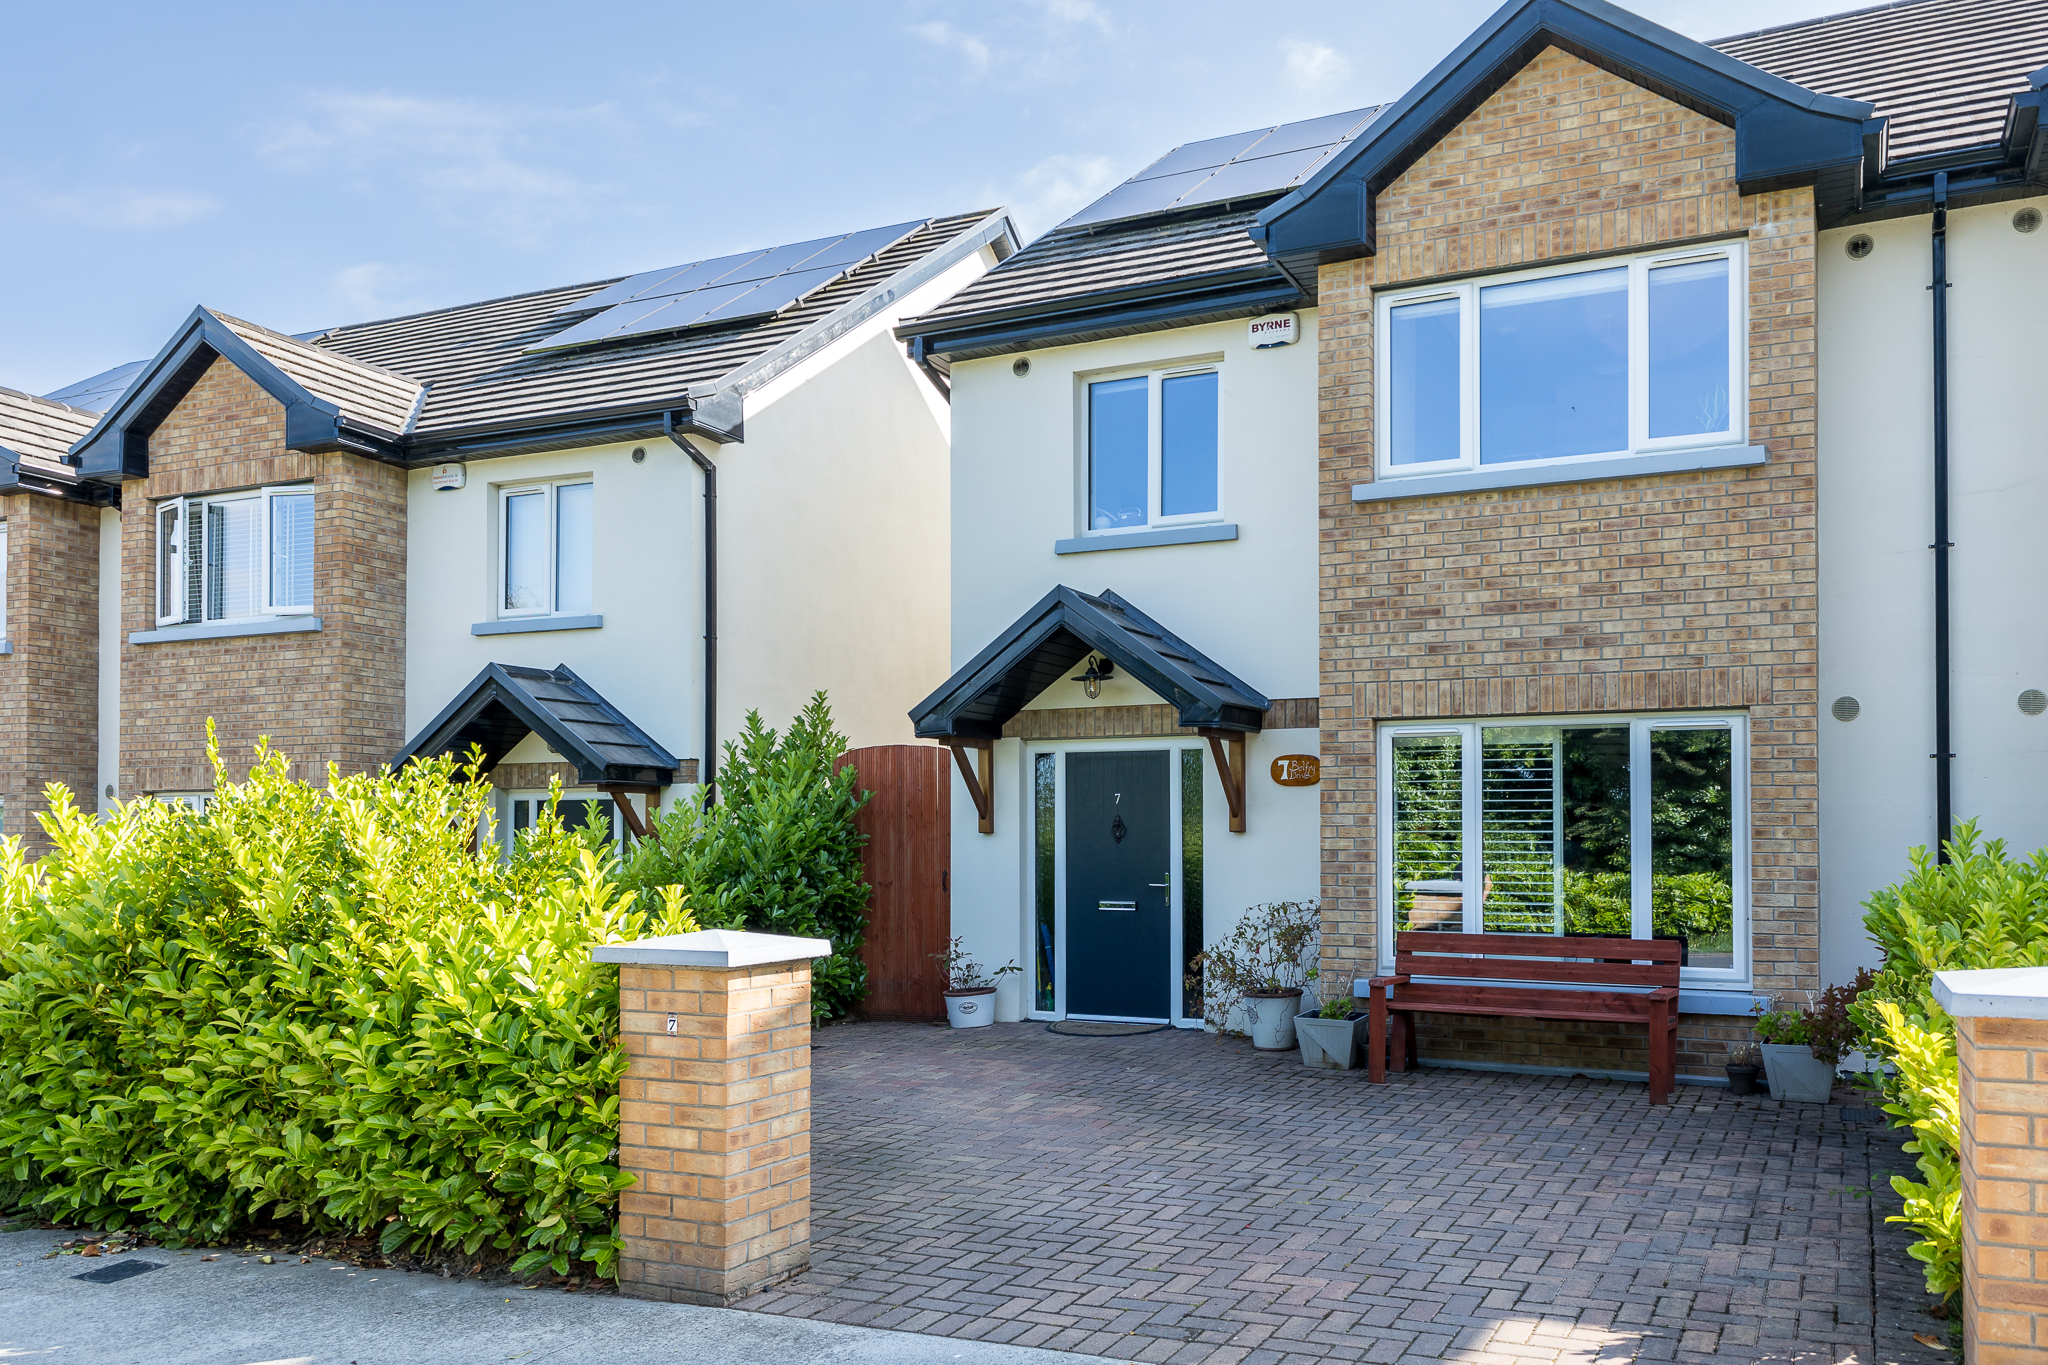 7 Belfry Drive Liscorrie Drogheda Co Louth